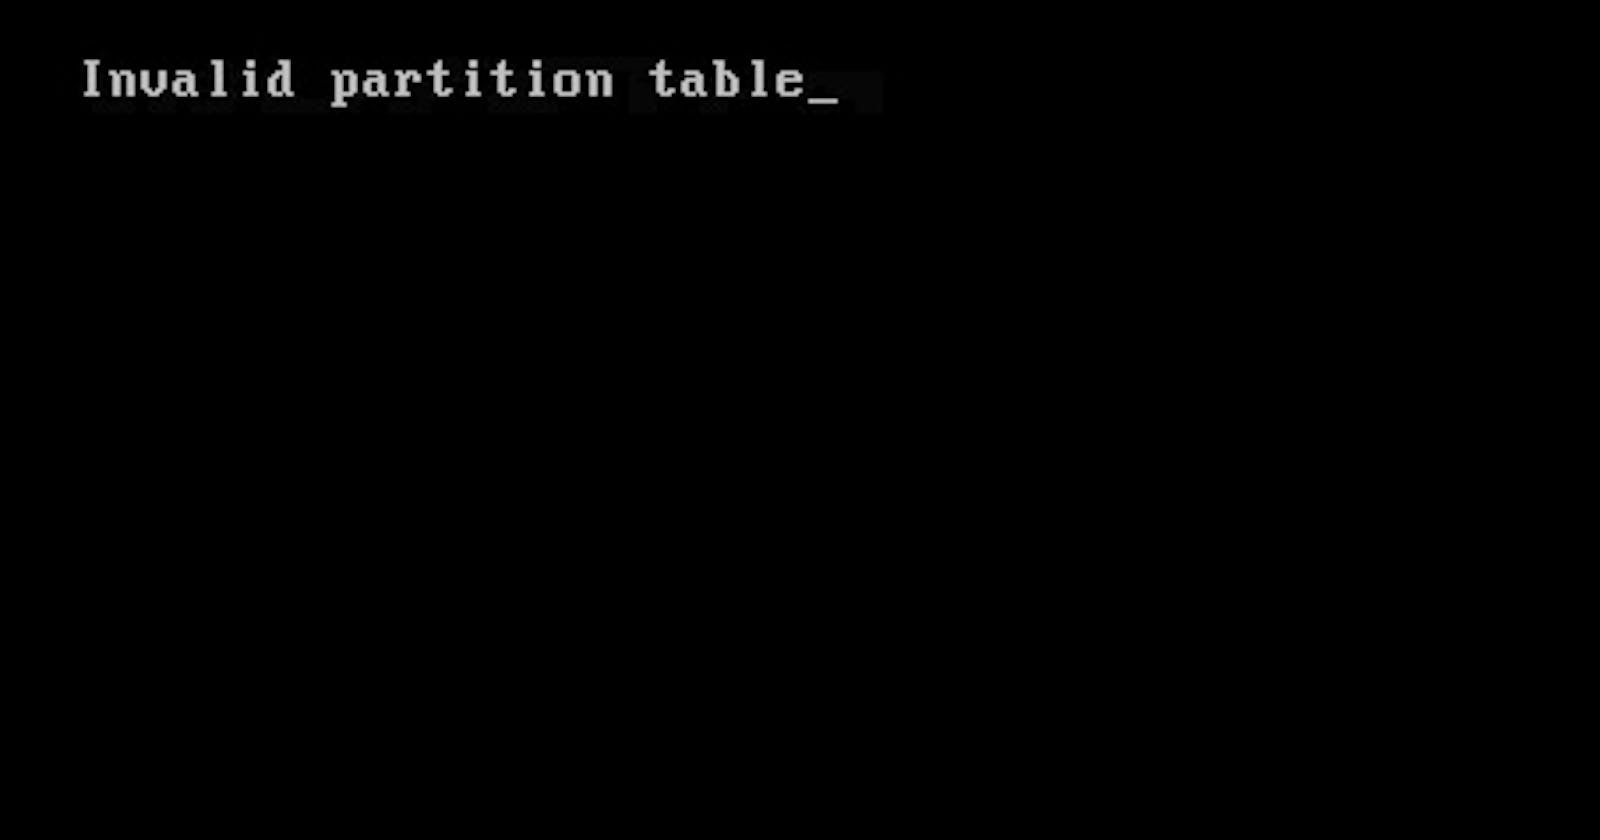 Solving "Invalid Partition Table" at startup on Ubuntu